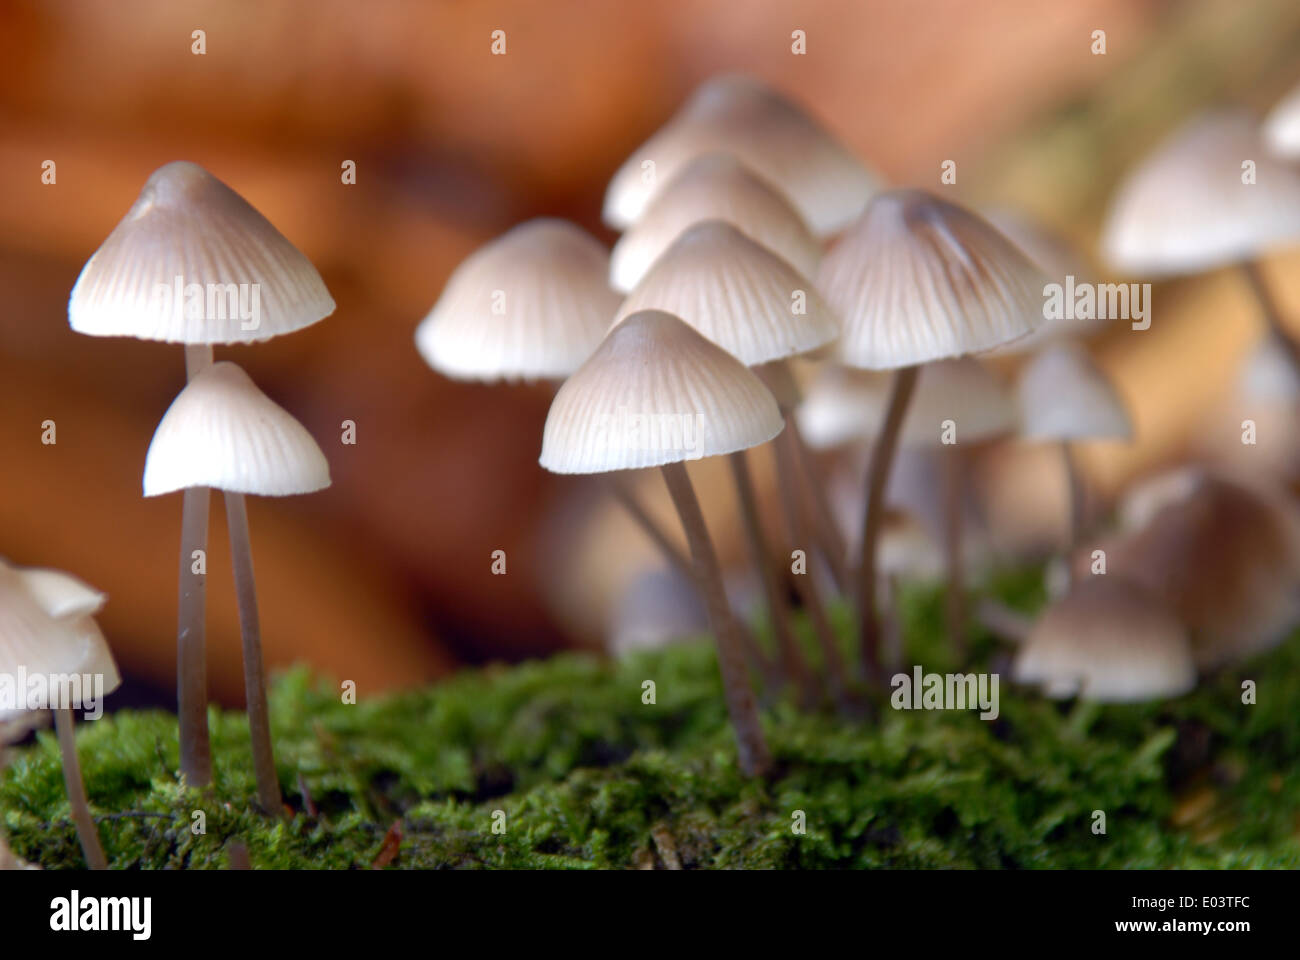 Toadstools growing on a rotten log. Stock Photo